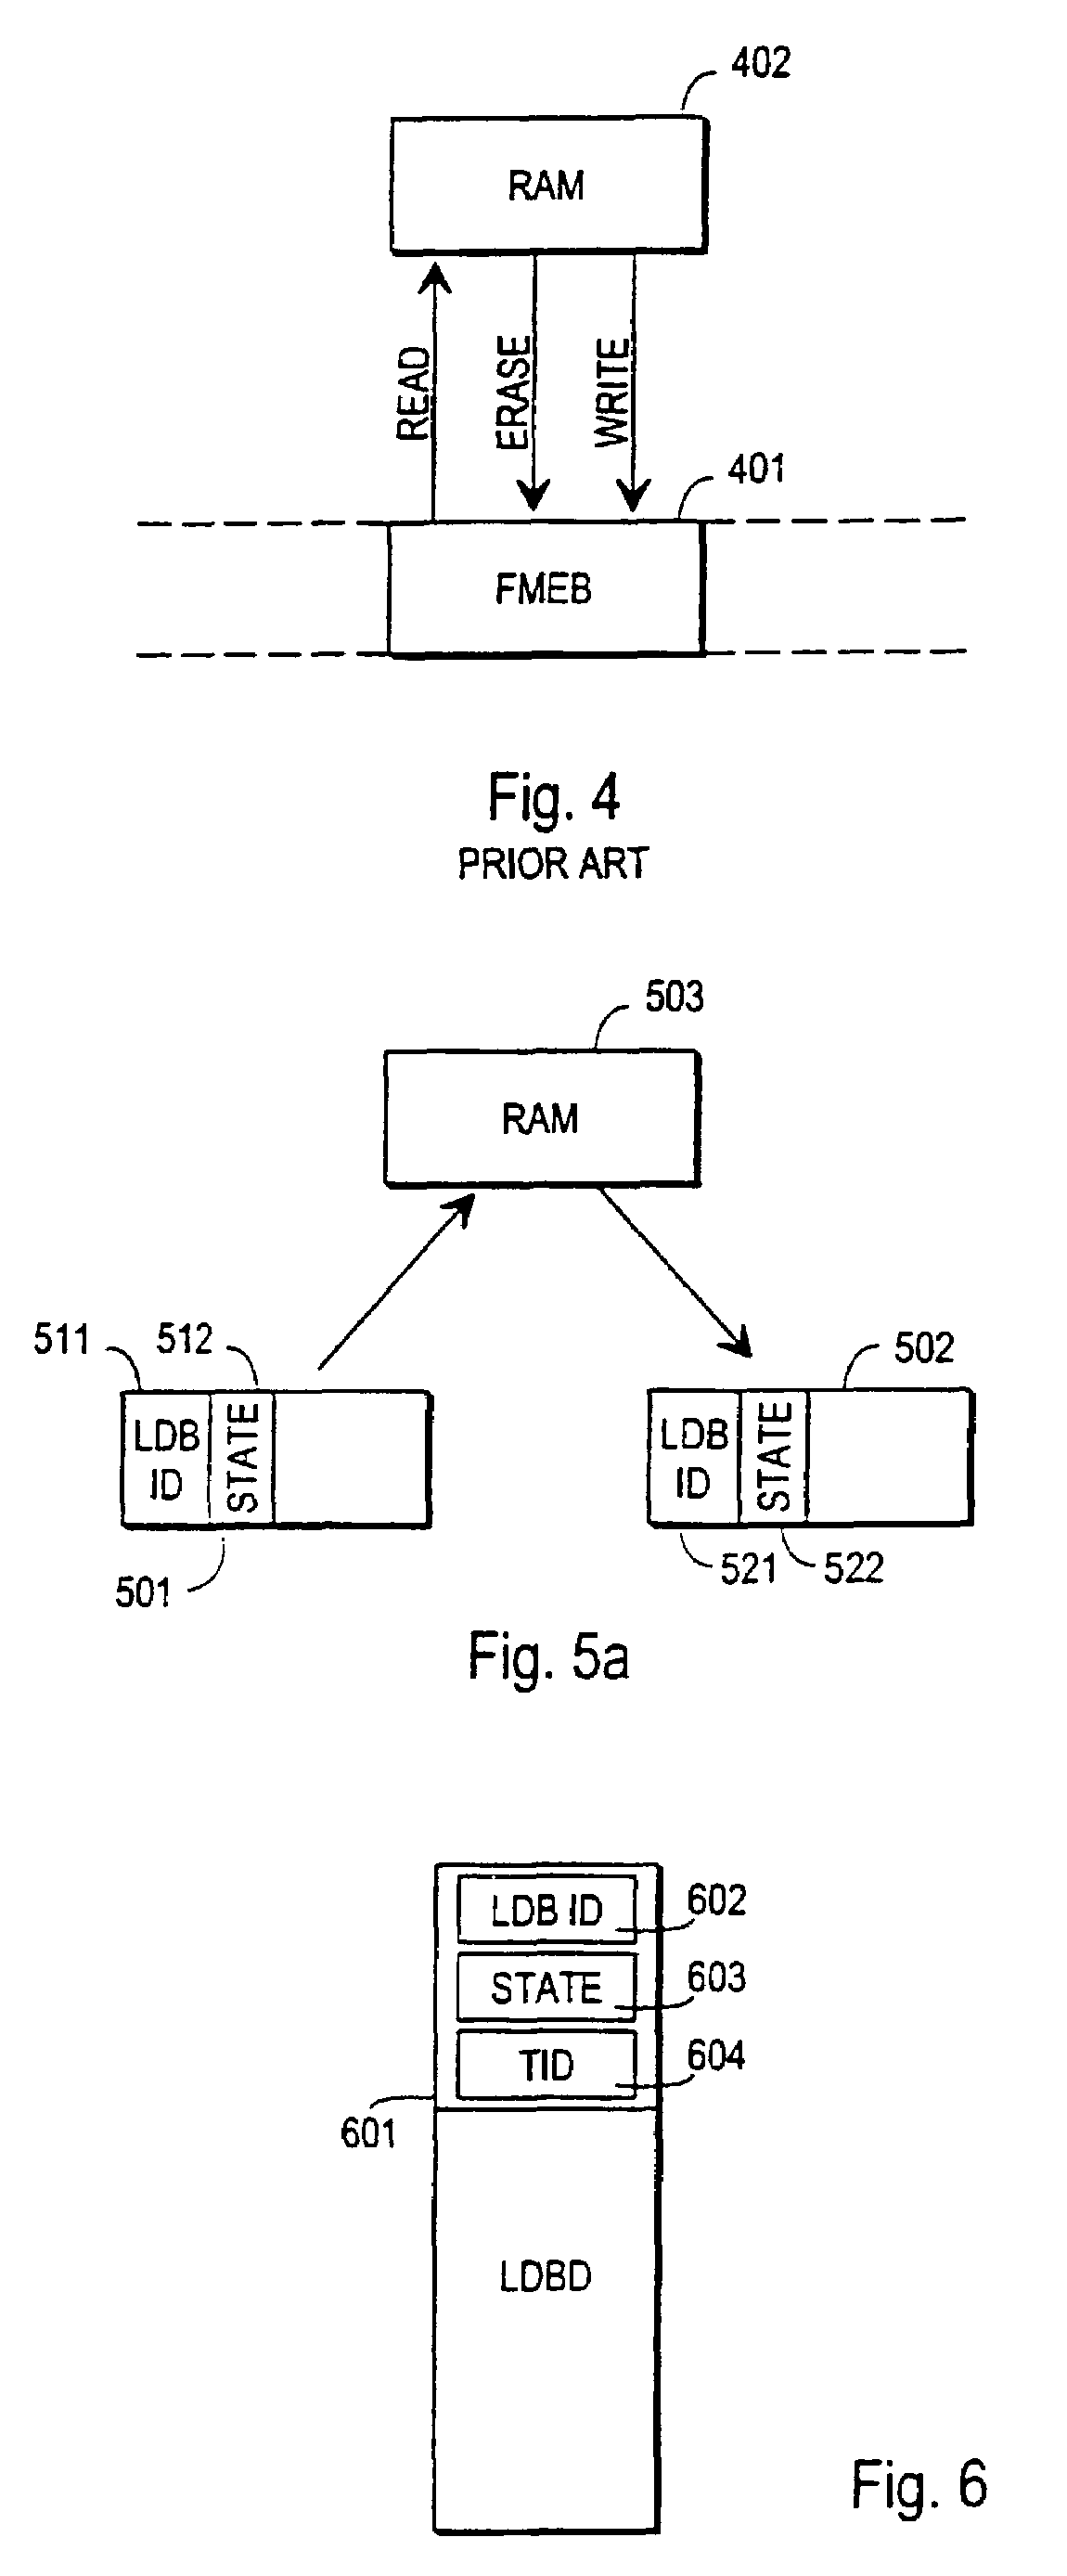 Method and arrangement for performing atomic updates using a logical flash memory device